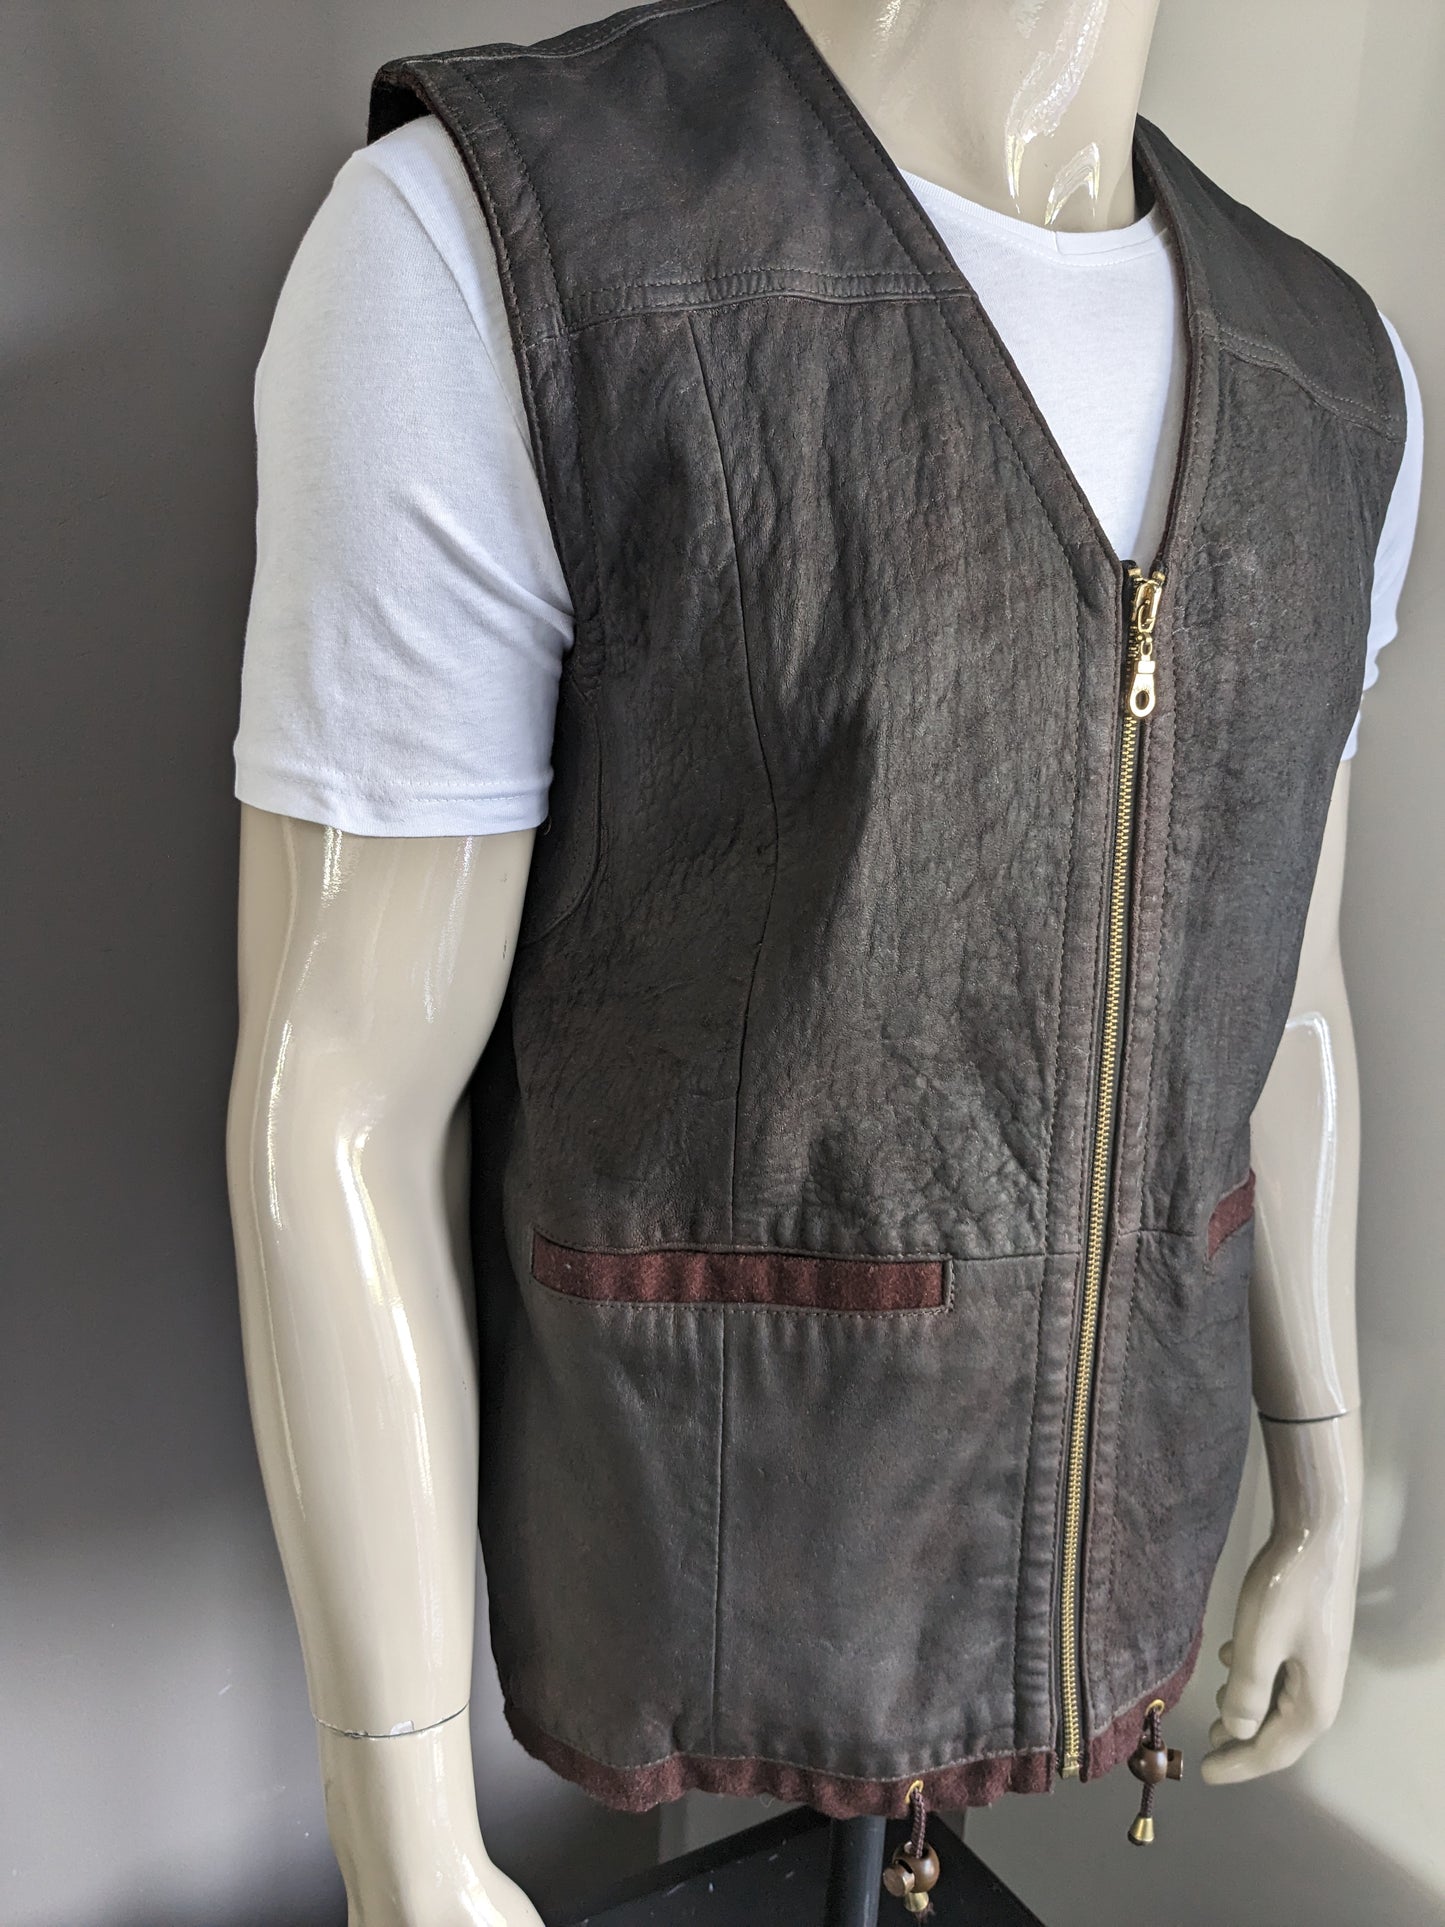 Cihander lamb leather waistcoat / body warmer with zipper. Double -sided leather. Dark brown colored. Size L.